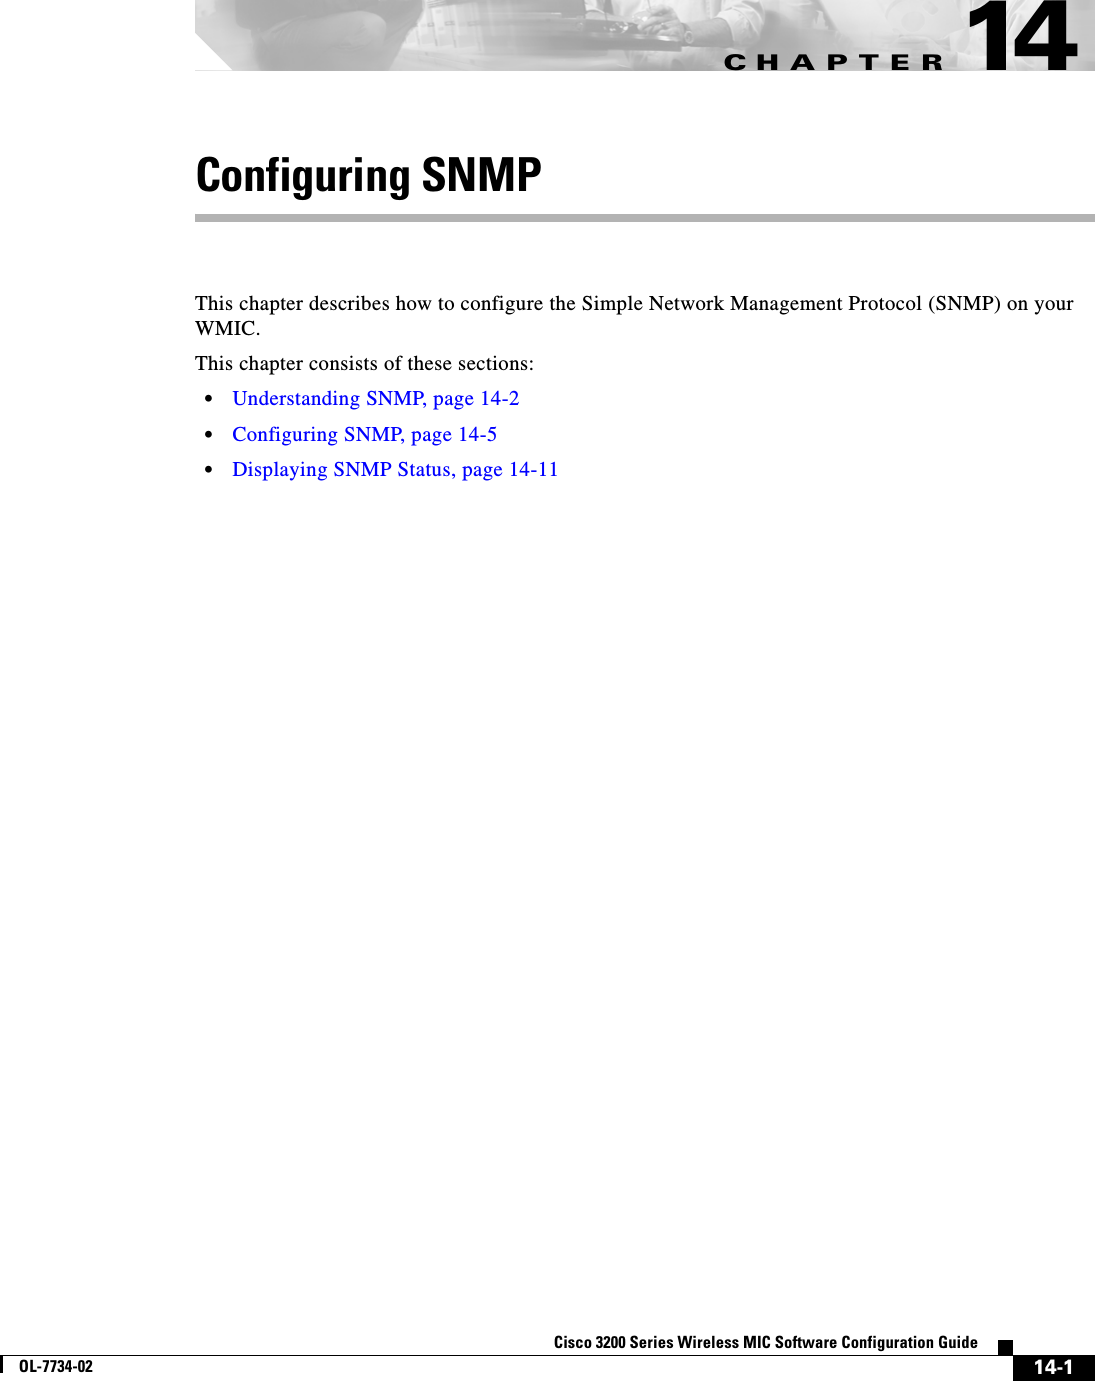 CHAPTER14-1Cisco 3200 Series Wireless MIC Software Configuration GuideOL-7734-0214Configuring SNMPThis chapter describes how to configure the Simple Network Management Protocol (SNMP) on your WMIC.This chapter consists of these sections:•Understanding SNMP, page 14-2•Configuring SNMP, page 14-5•Displaying SNMP Status, page 14-11